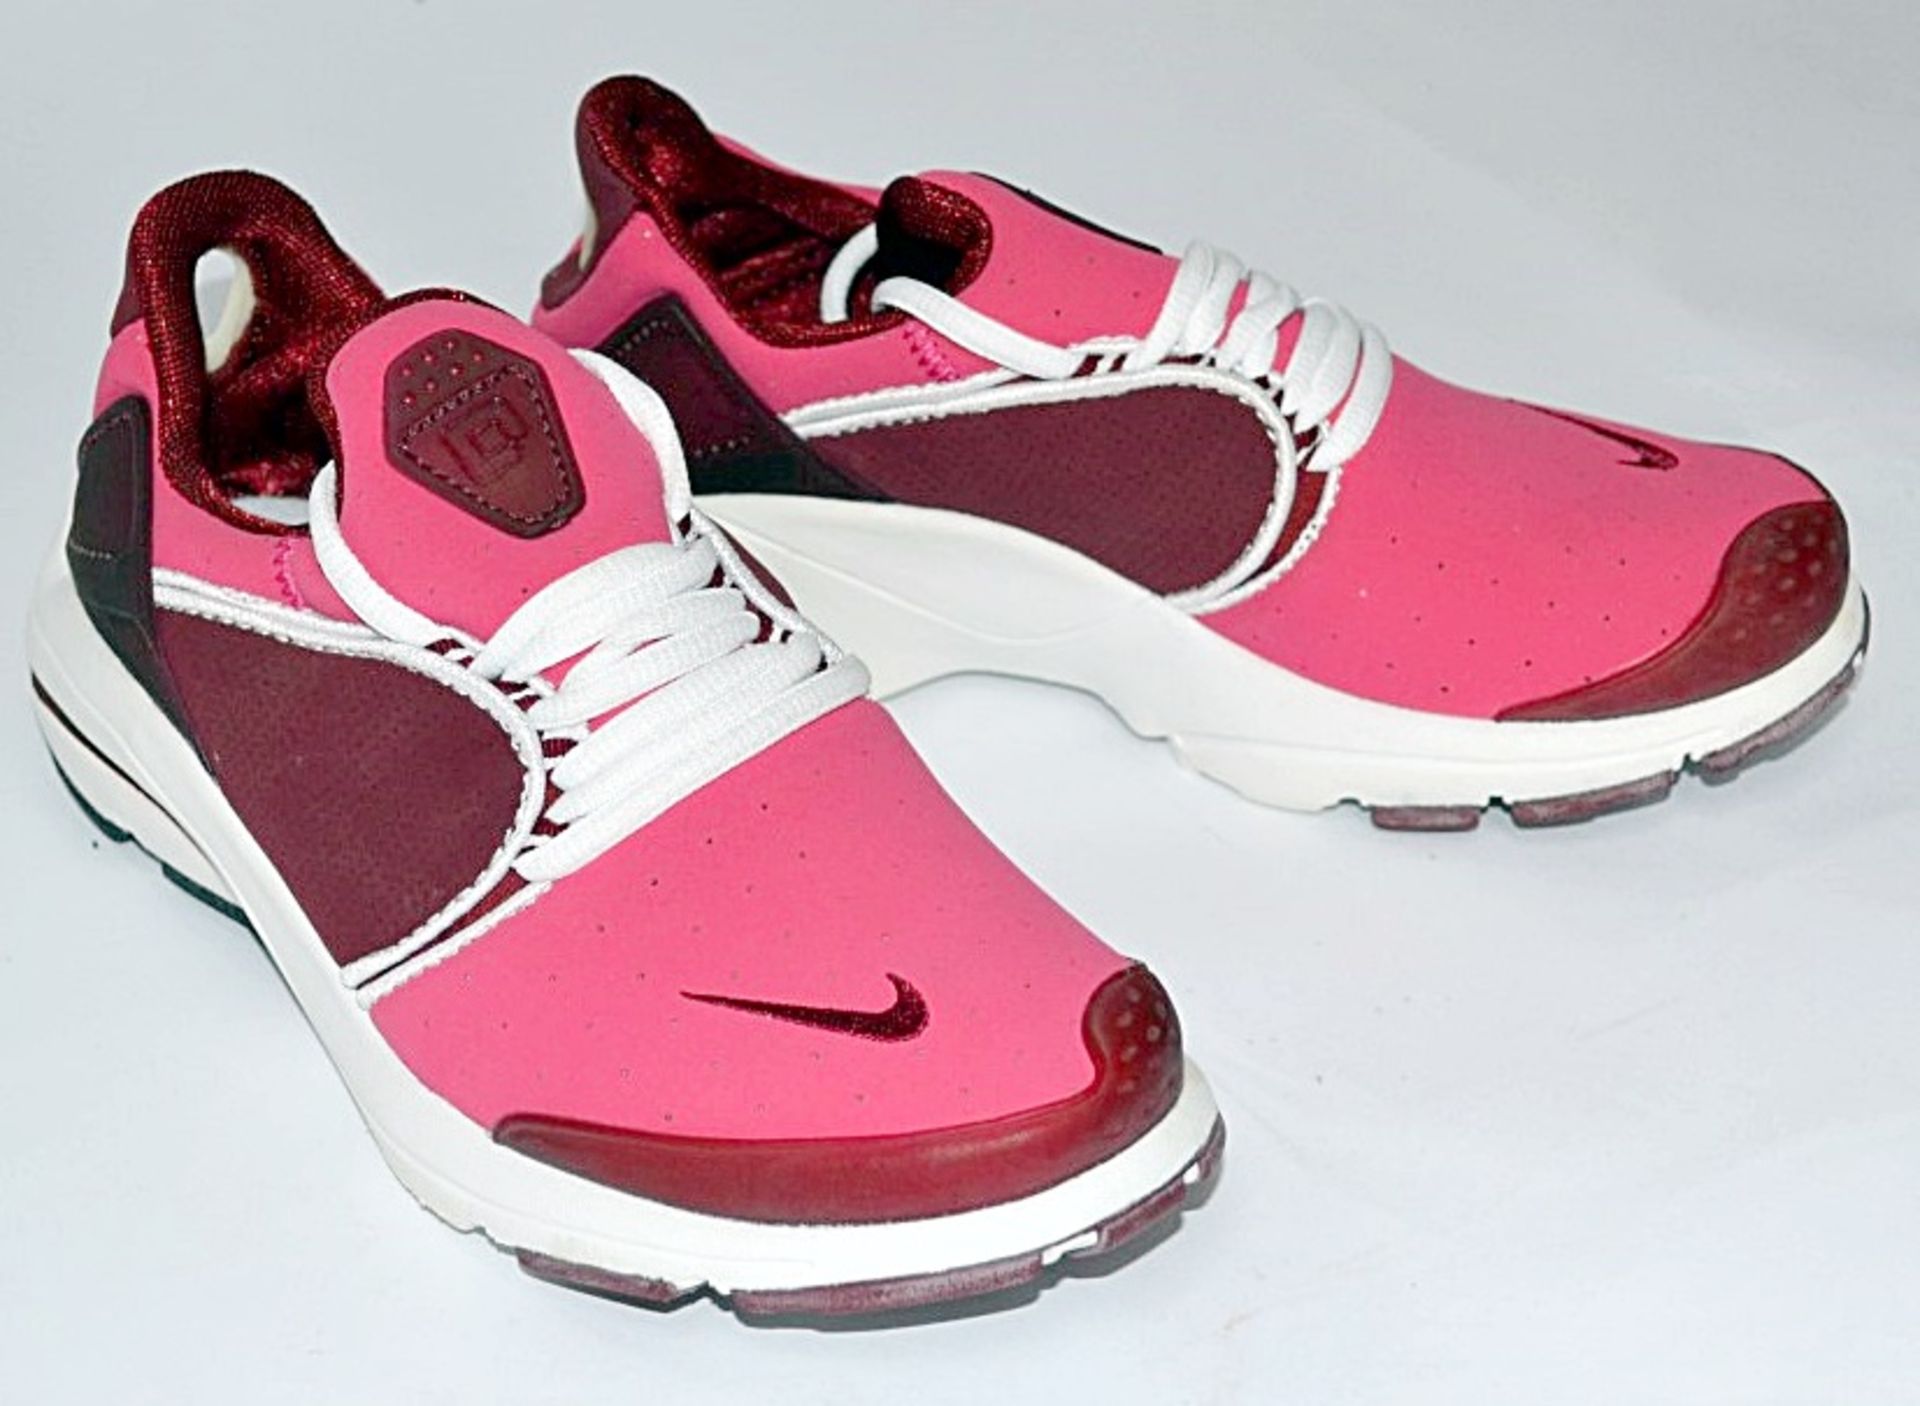 1 x Pair Of NIKE "Air Presto" Ladies Trainers - Size: UK 3 XS - Colour: Pink - CL155 - Ref: WHI091 -